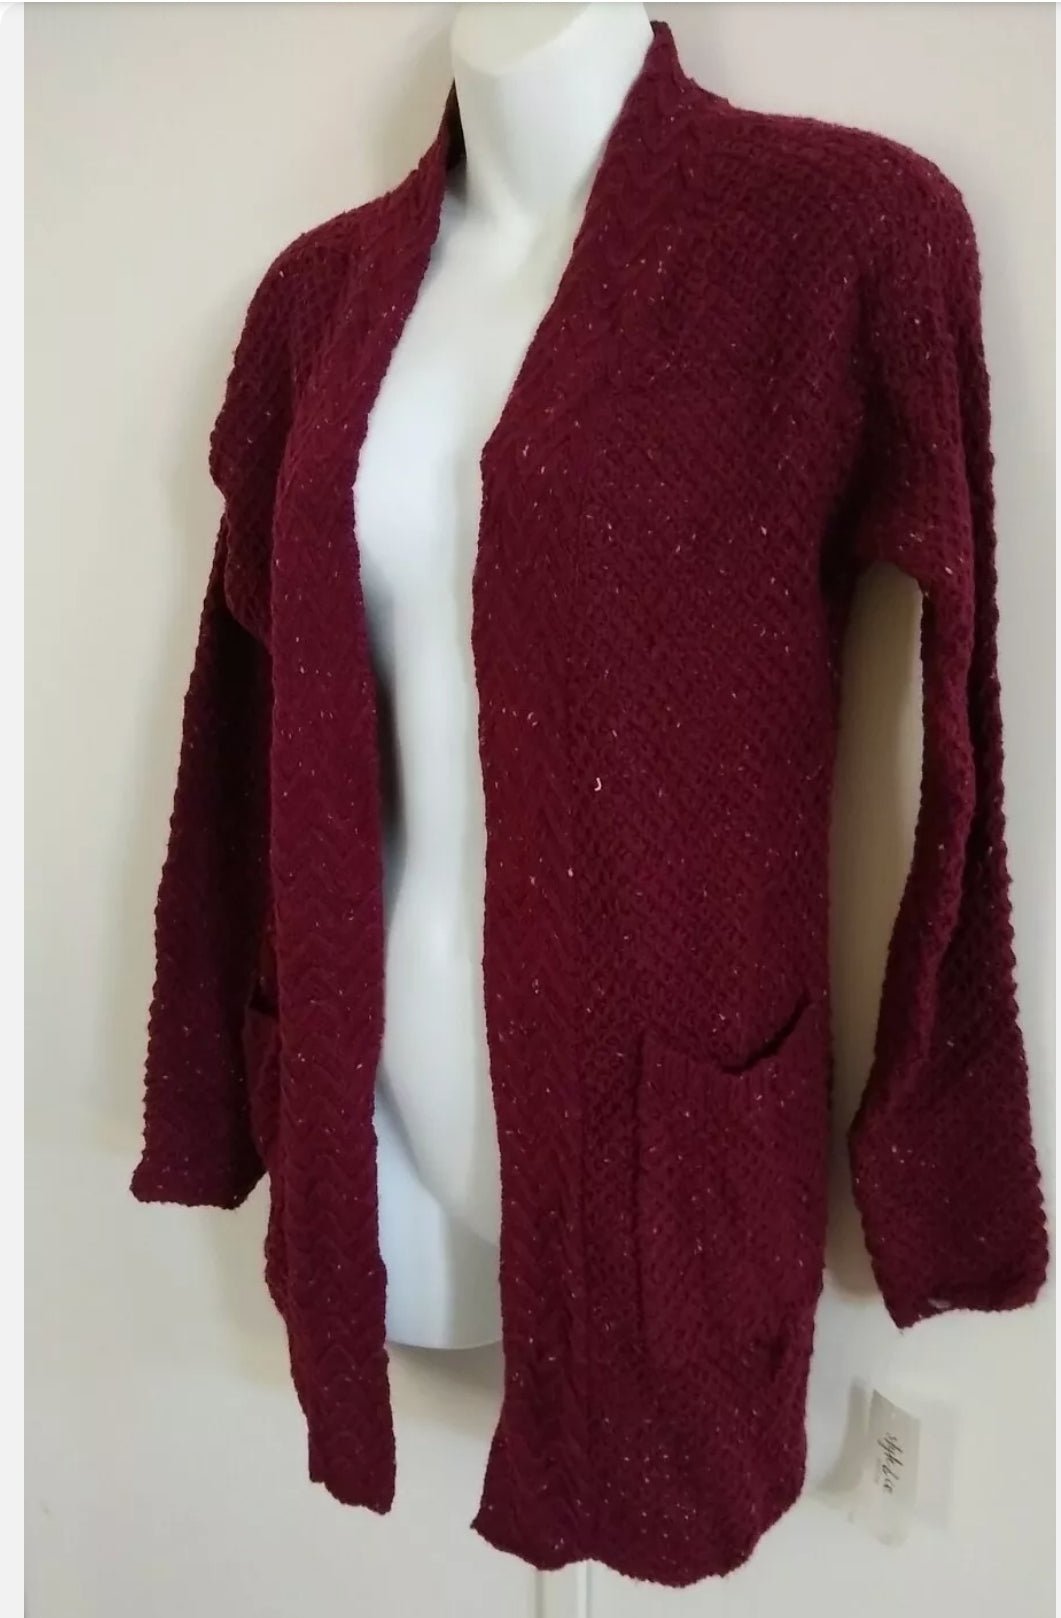 Style & Co Long Sleeve w/Pockets Completer Scarlet Wine Open Cardigan Size PS - BELLEZA'S - Style & Co Long Sleeve w/Pockets Completer Scarlet Wine Open Cardigan Size PS - BELLEZA'S - -